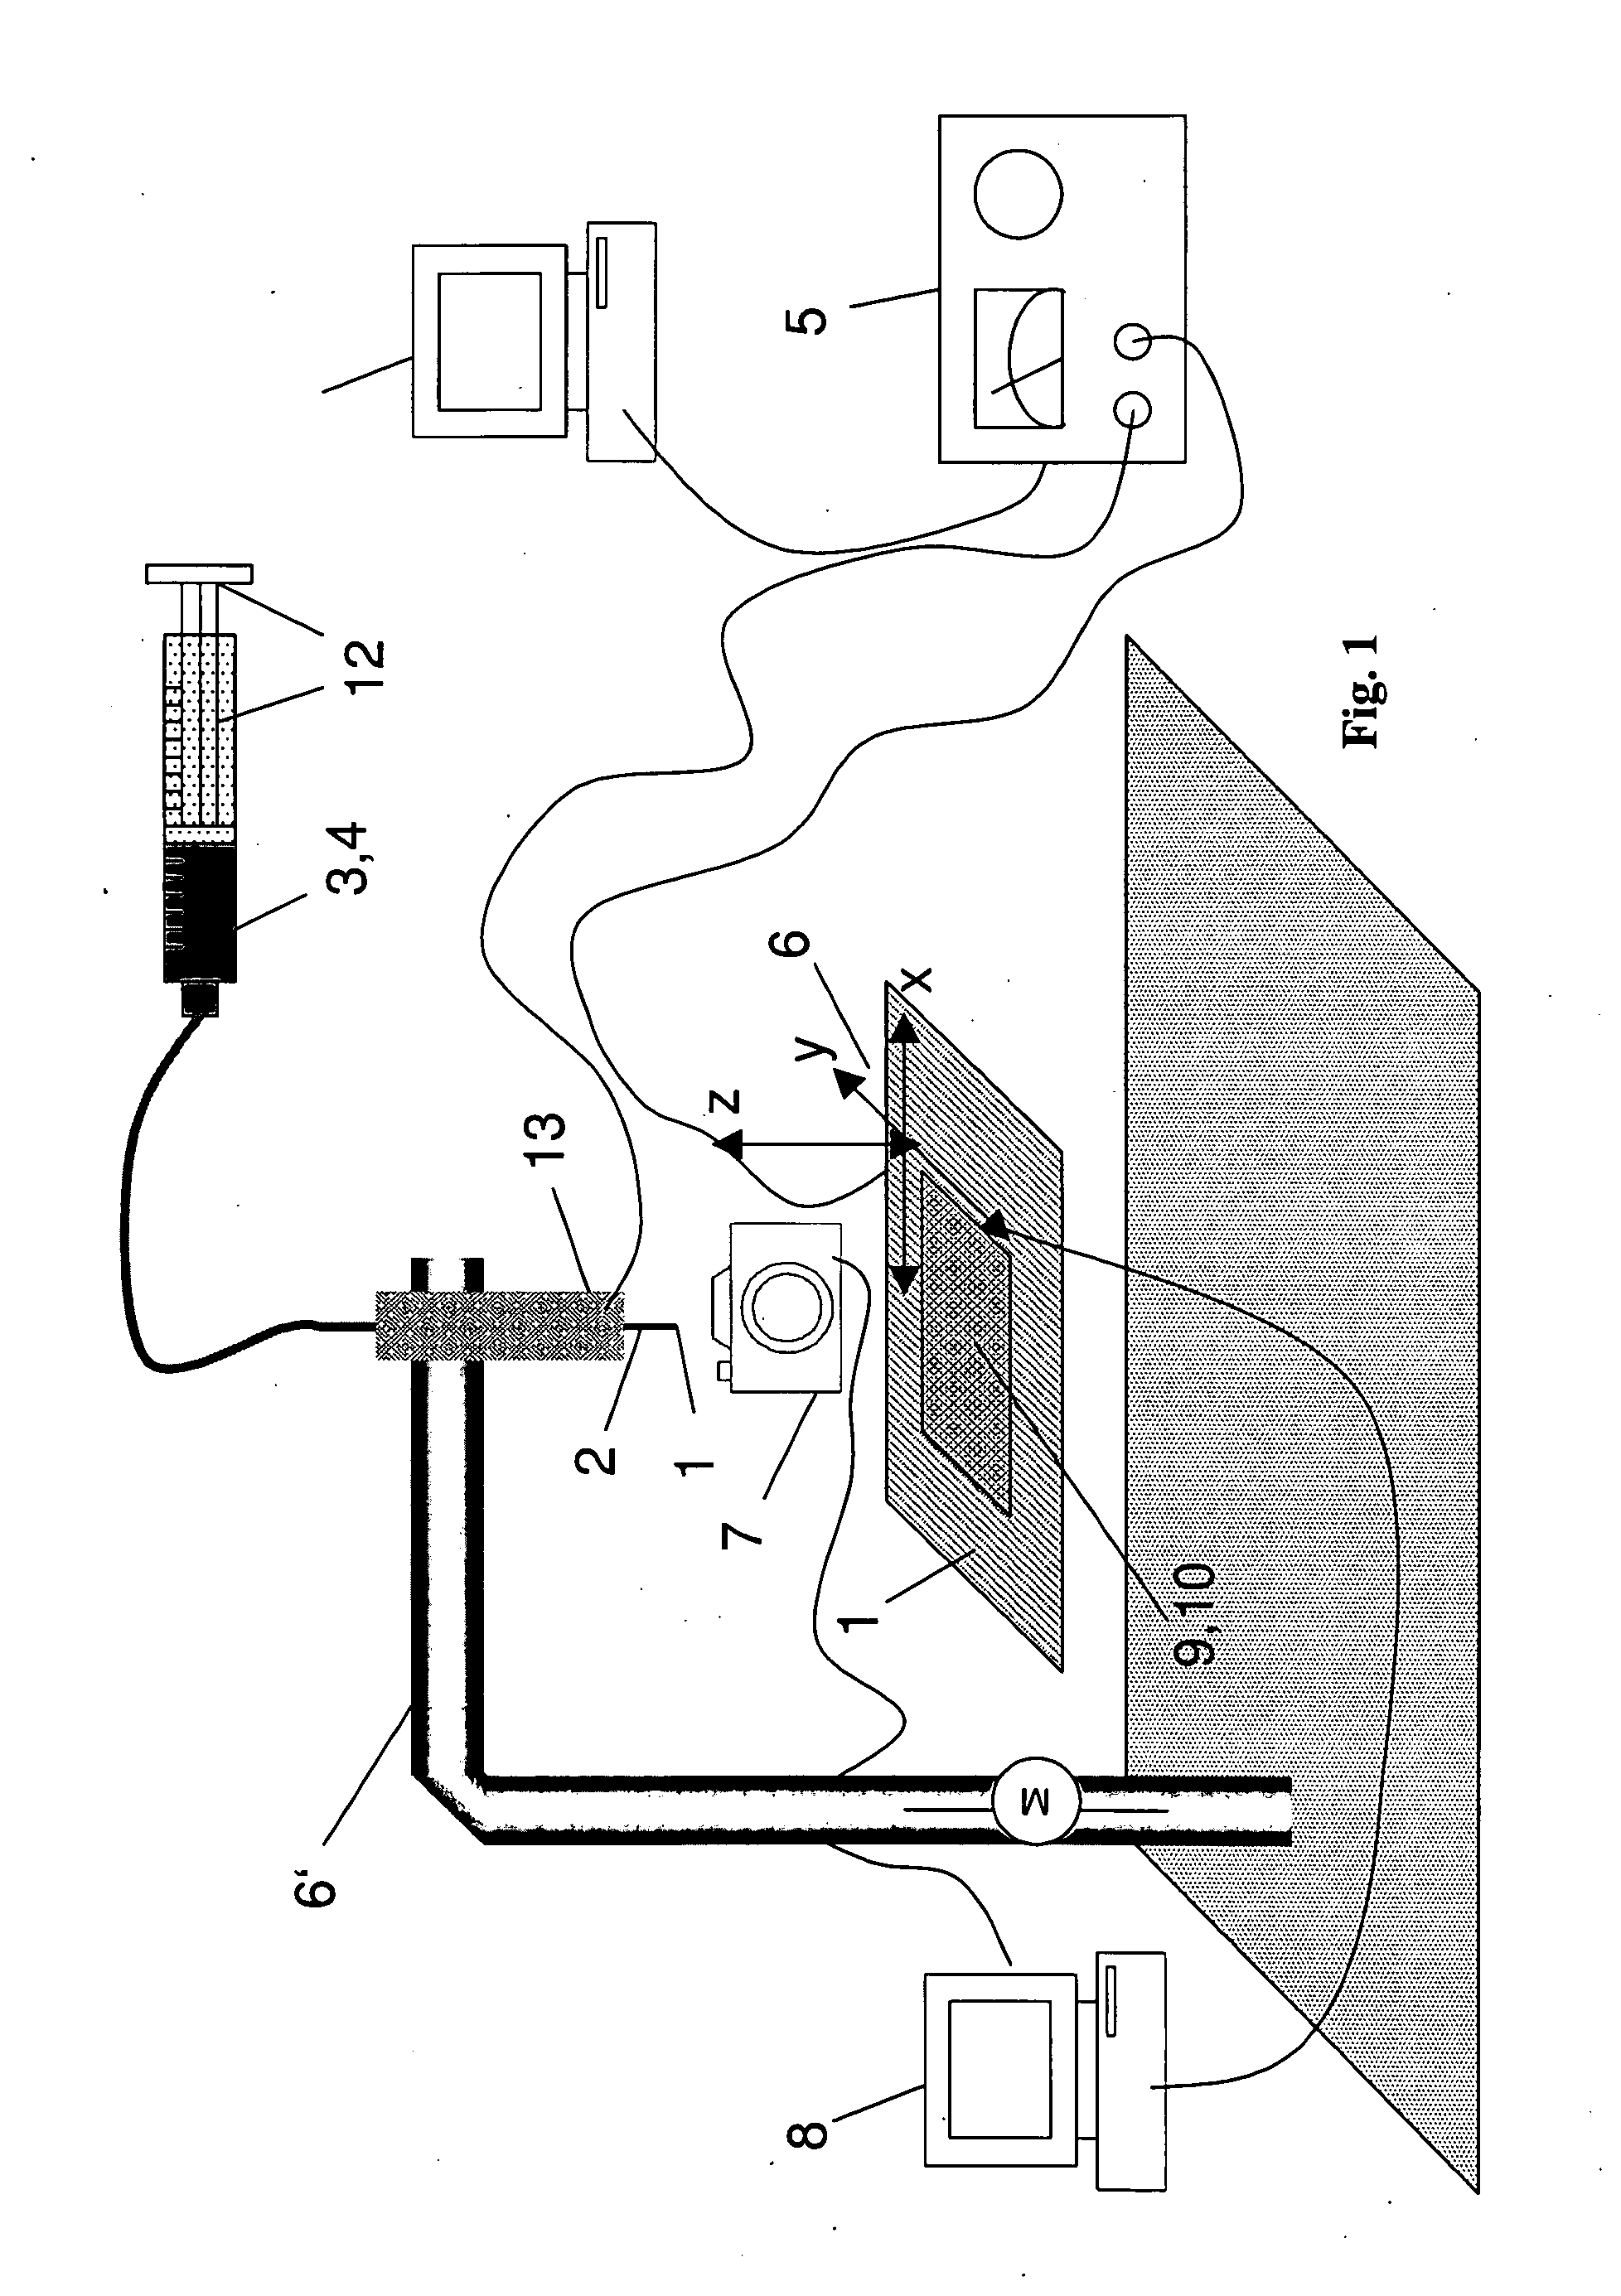 Apparatus and method for producing electrically conducting nanostructures by means of electrospinning